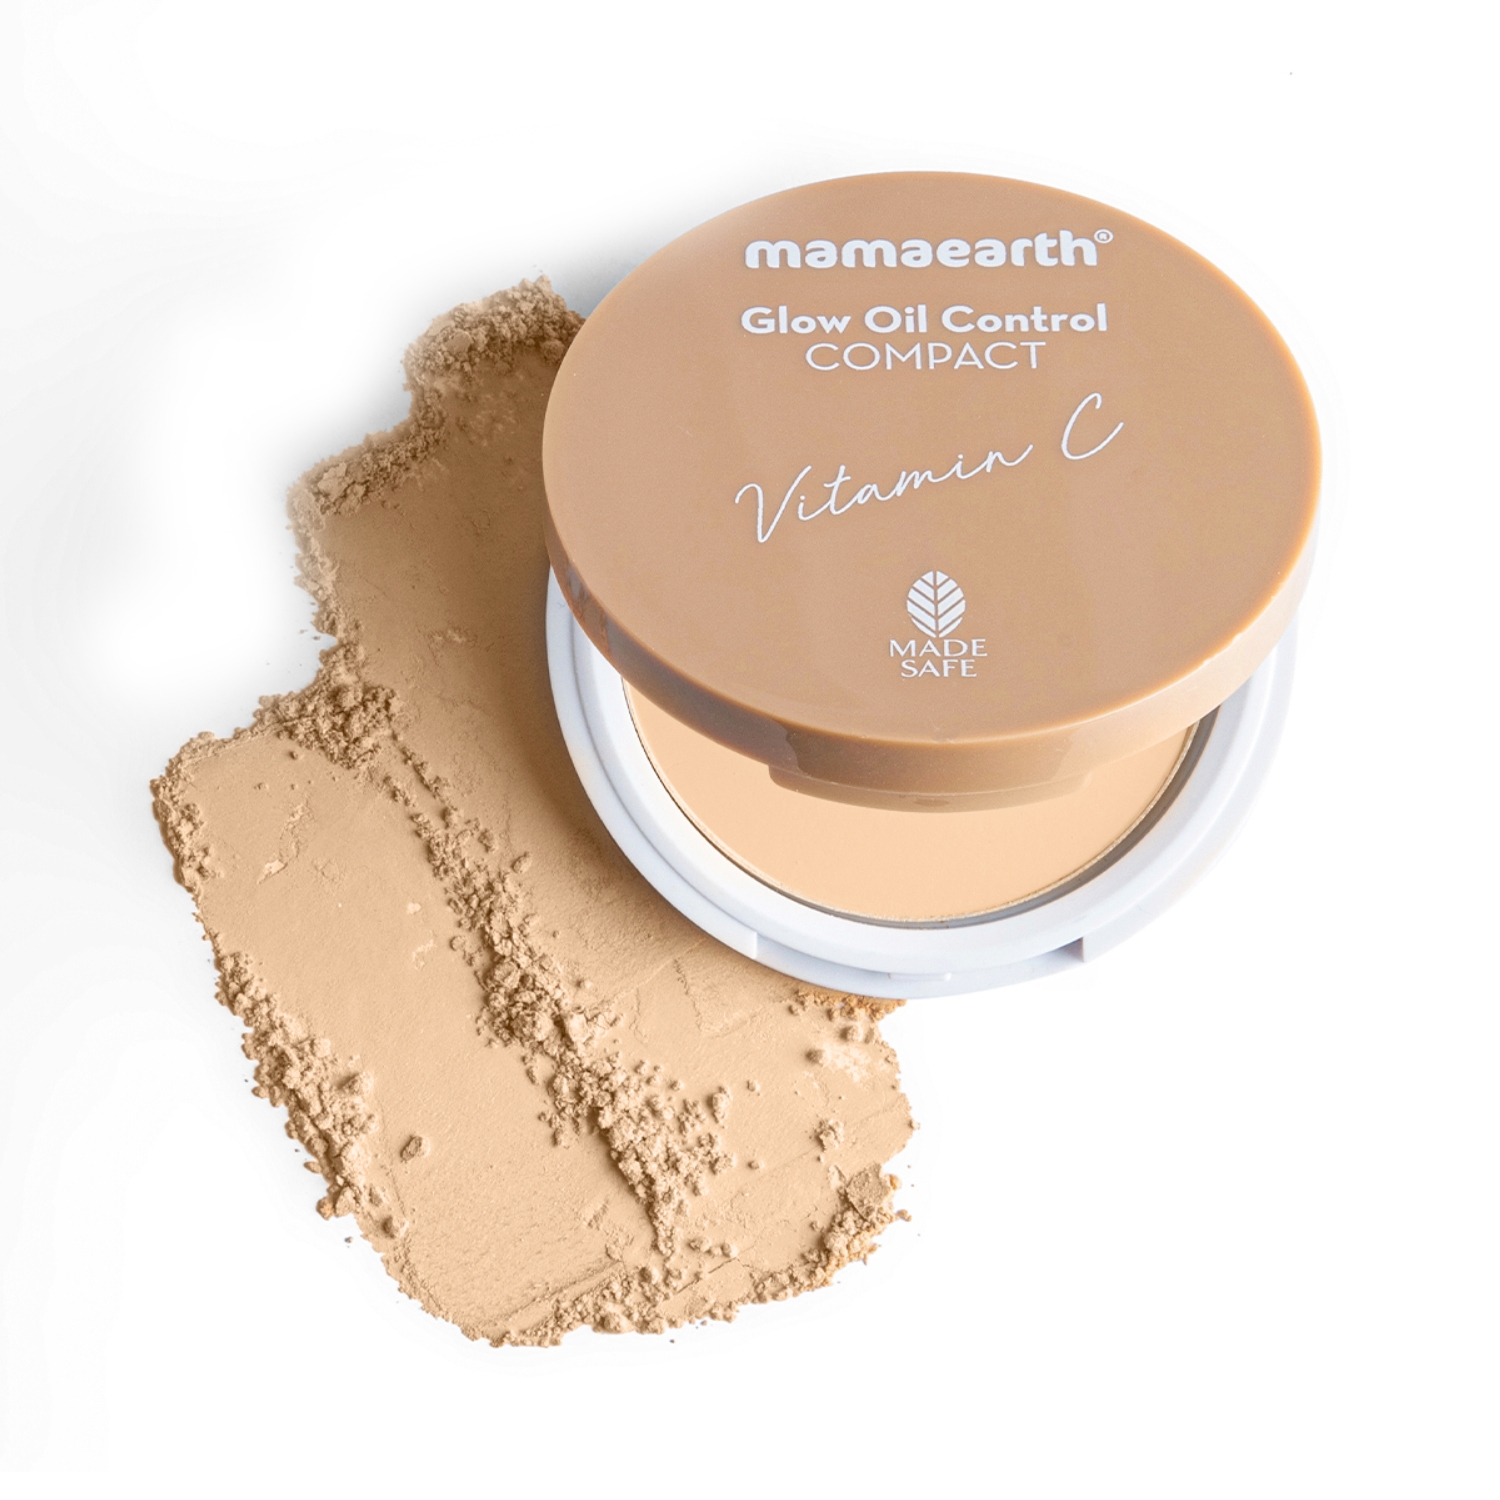 Mamaearth | Mamaearth Glow Oil Control Compact SPF 30 - 01 Ivory Glow (9g)